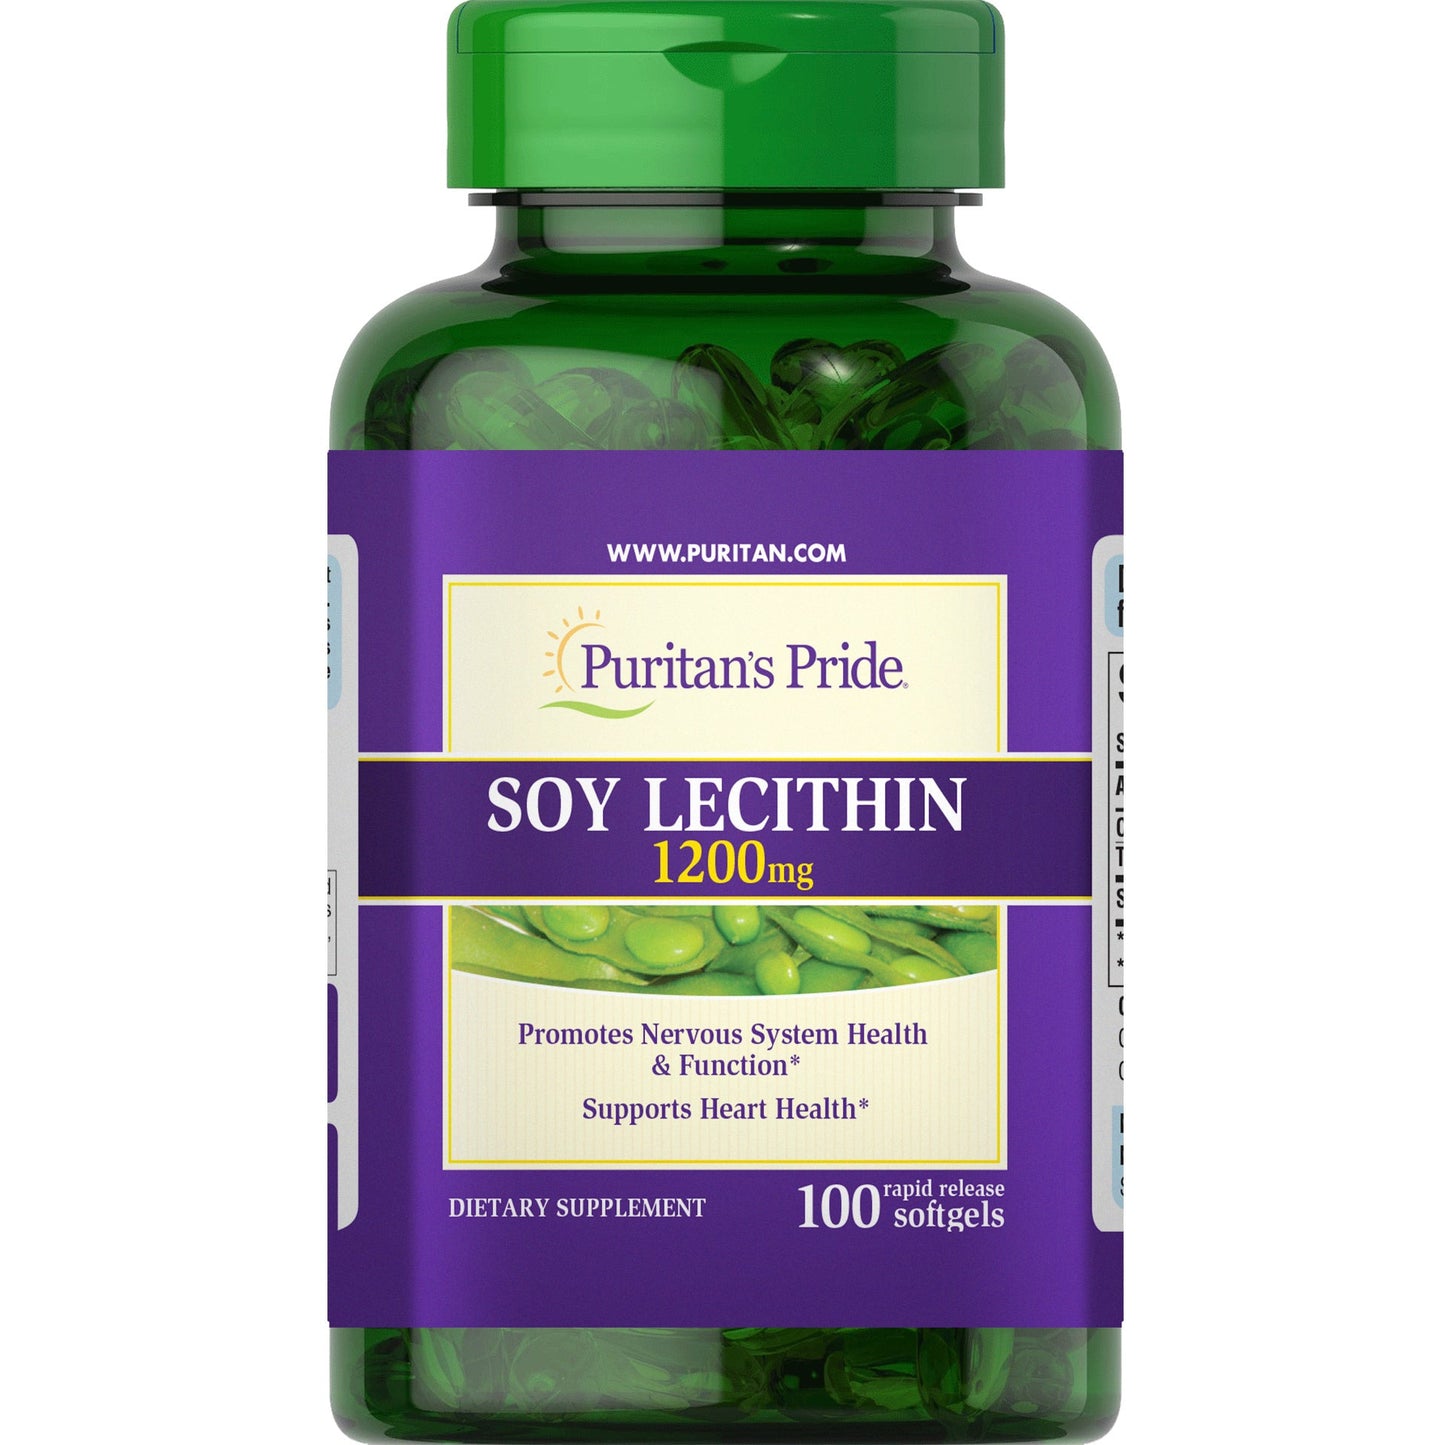 Soy Lecithin 1200mg 100 Rapid Release Softgels